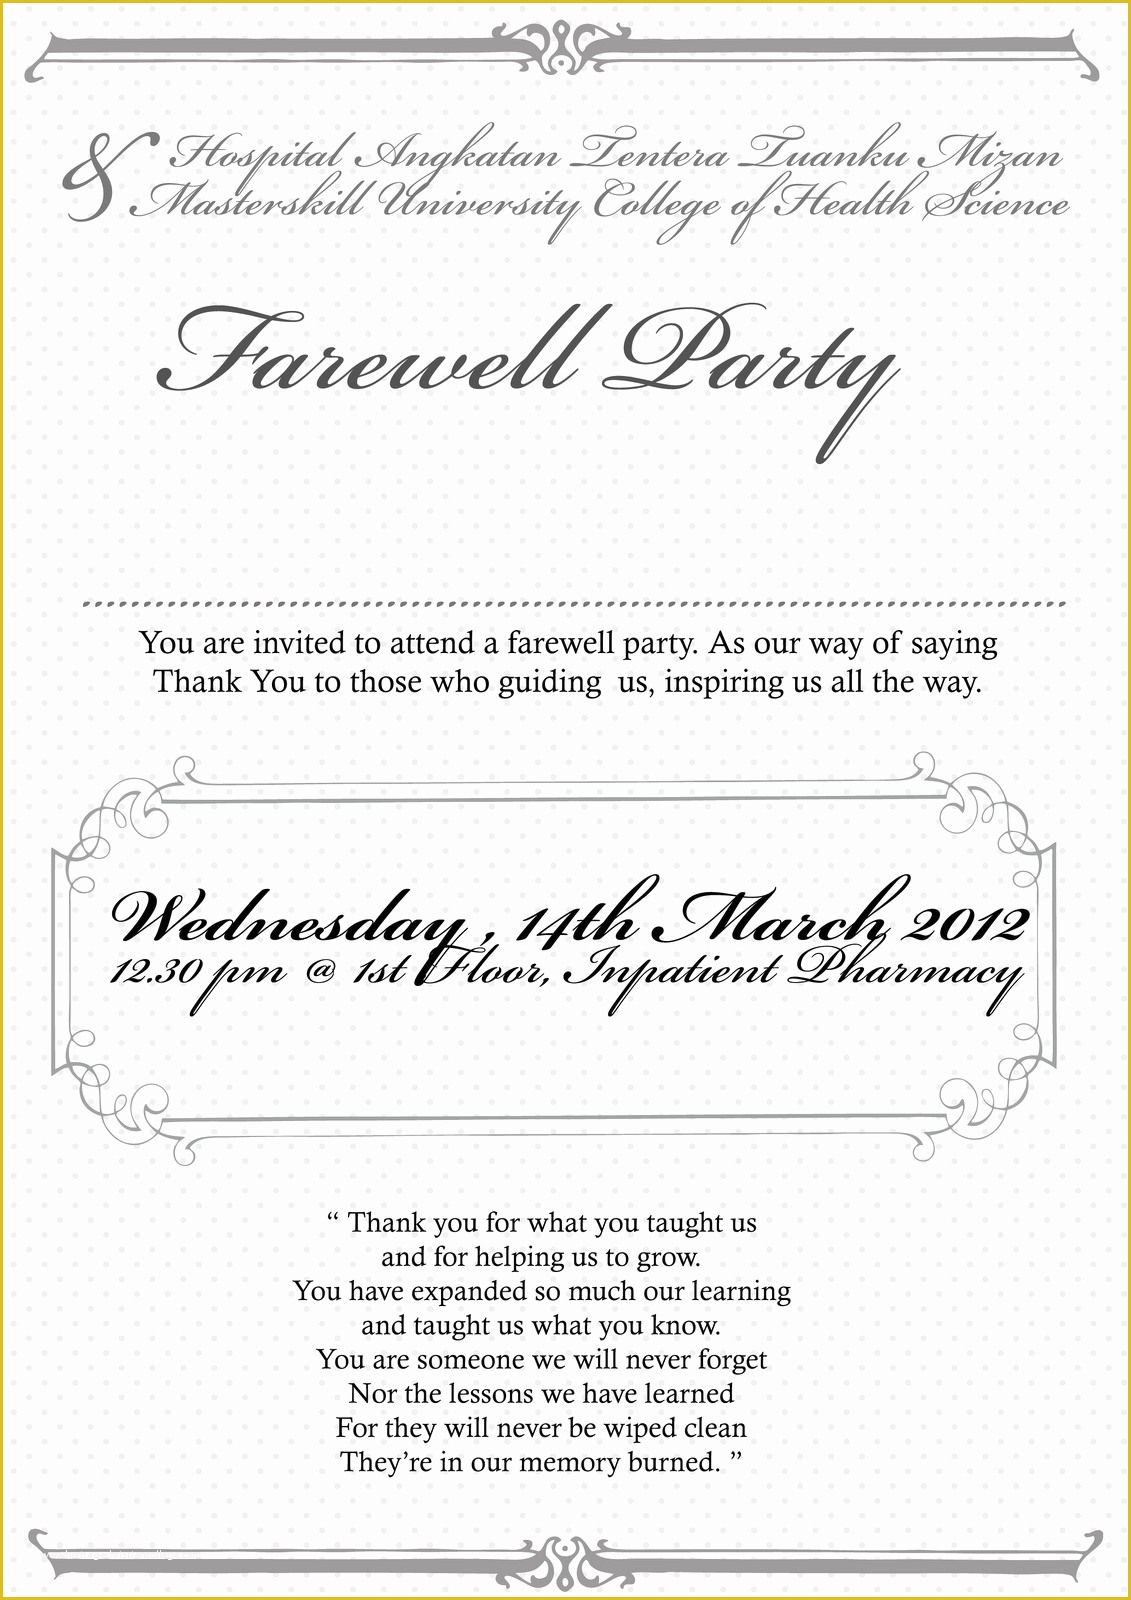 Free Printable Invitation Templates Going Away Party Of Free Printable Invitation Templates Going Away Party